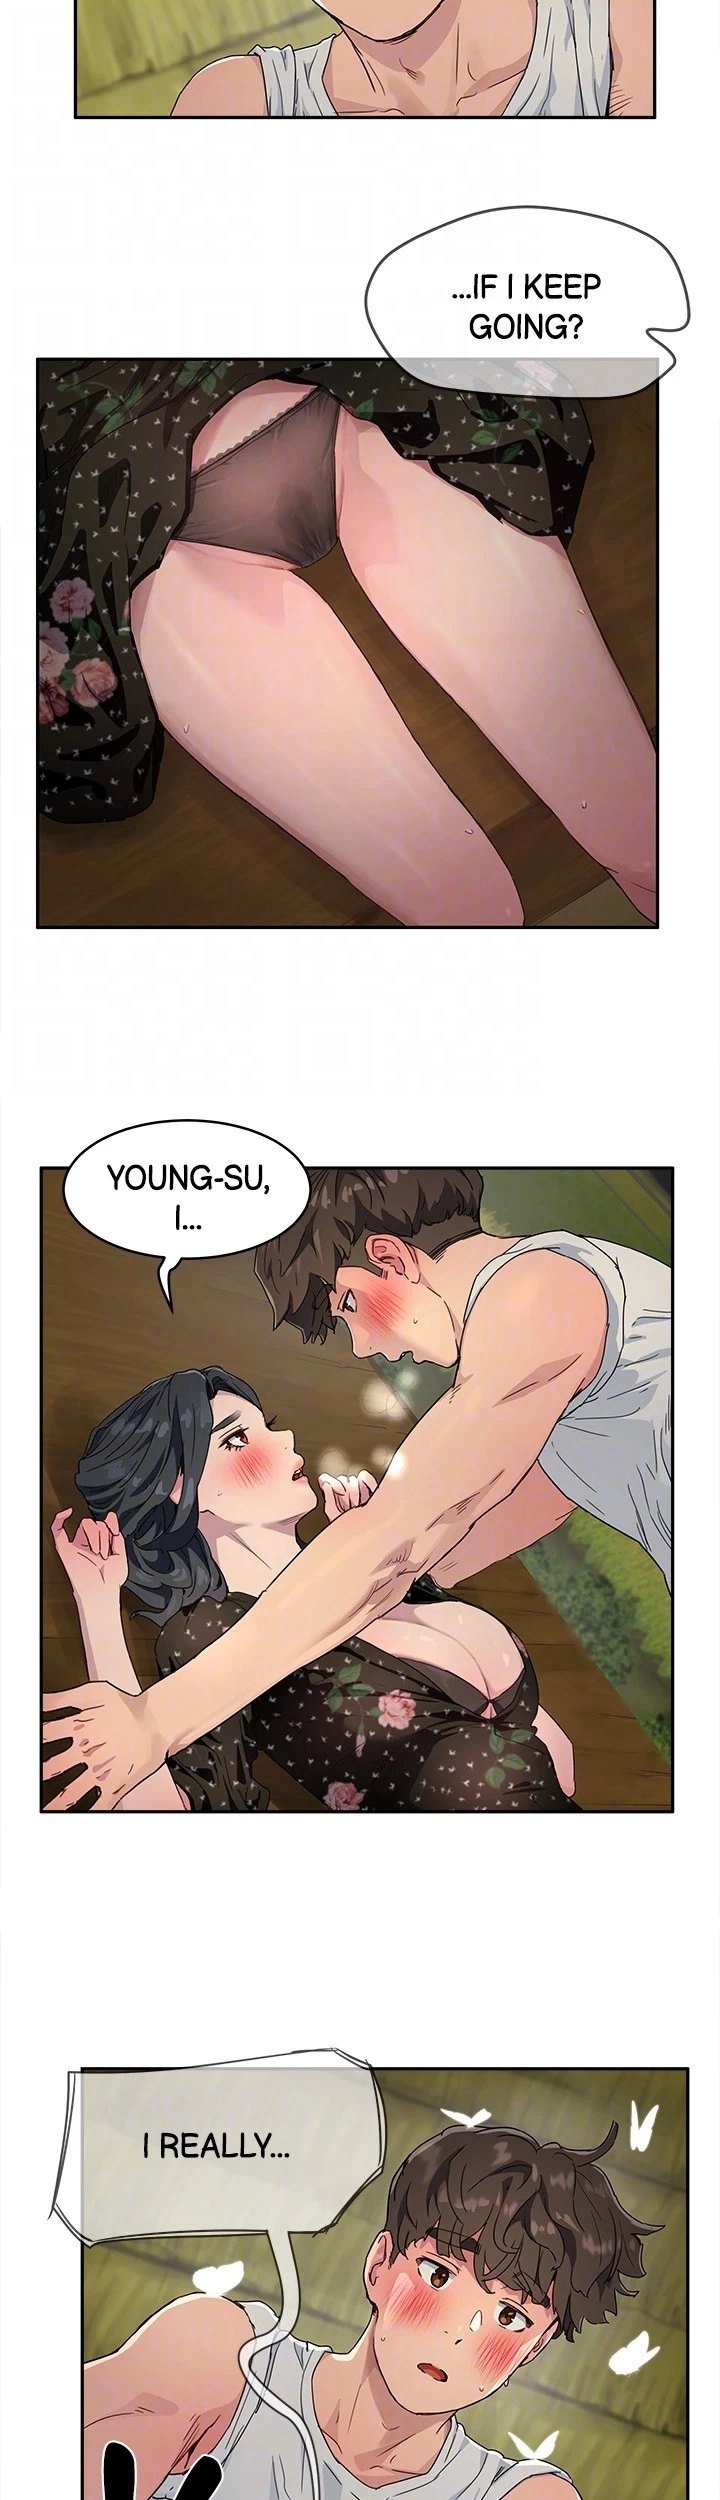 in-the-summer-chap-31-19